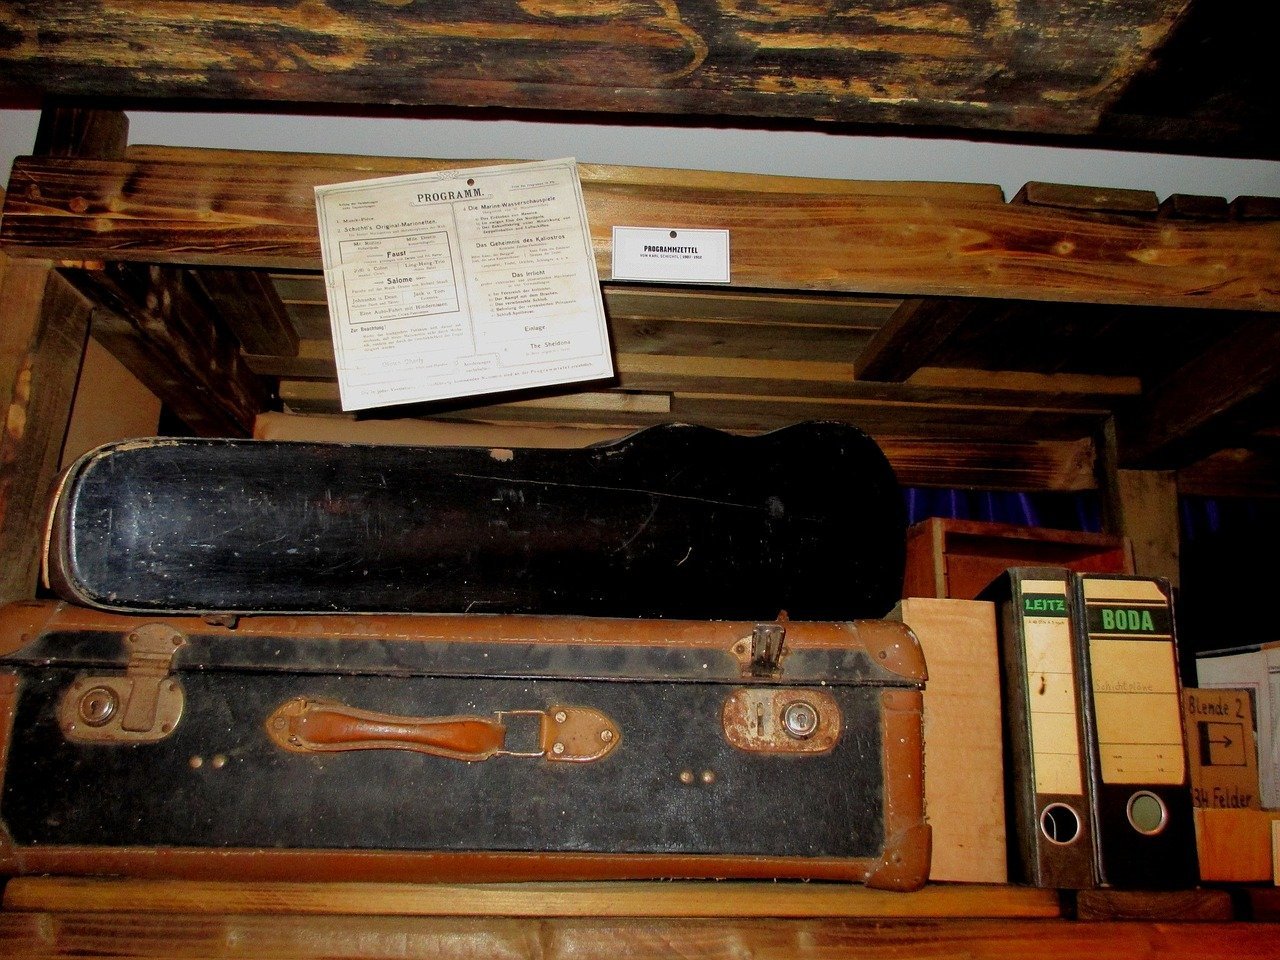 Old luggage in an attic. Image credit: Pixabay